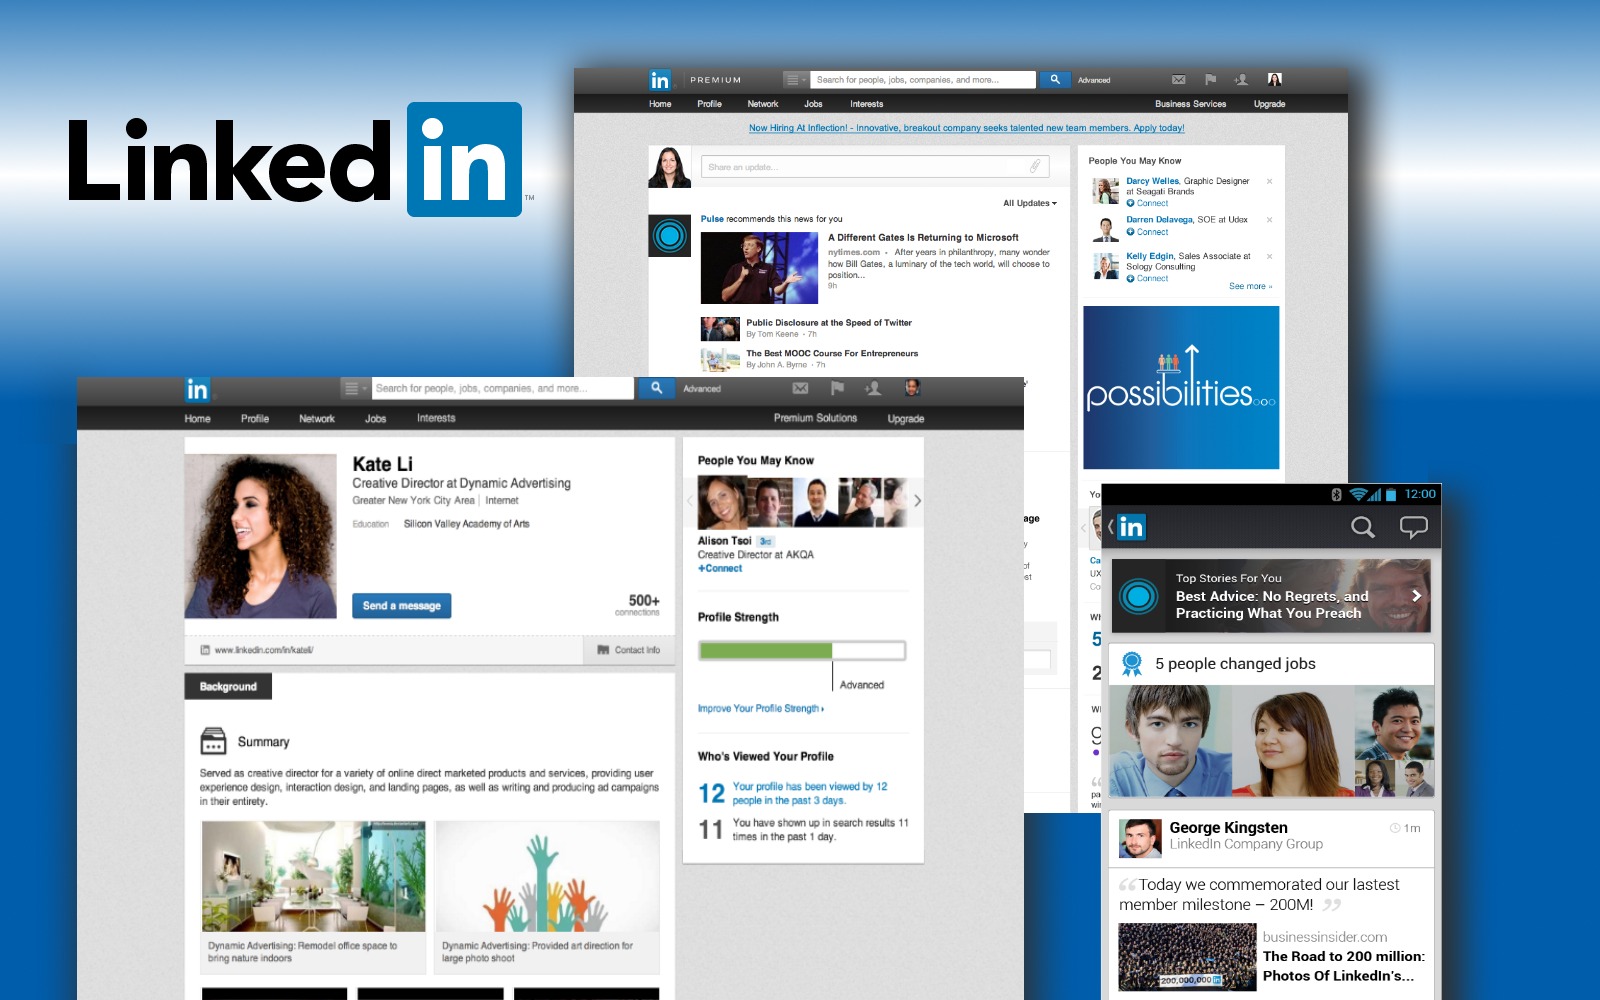 HOW CAN WE GROW OUR BUSINESS WITH LINKEDIN?